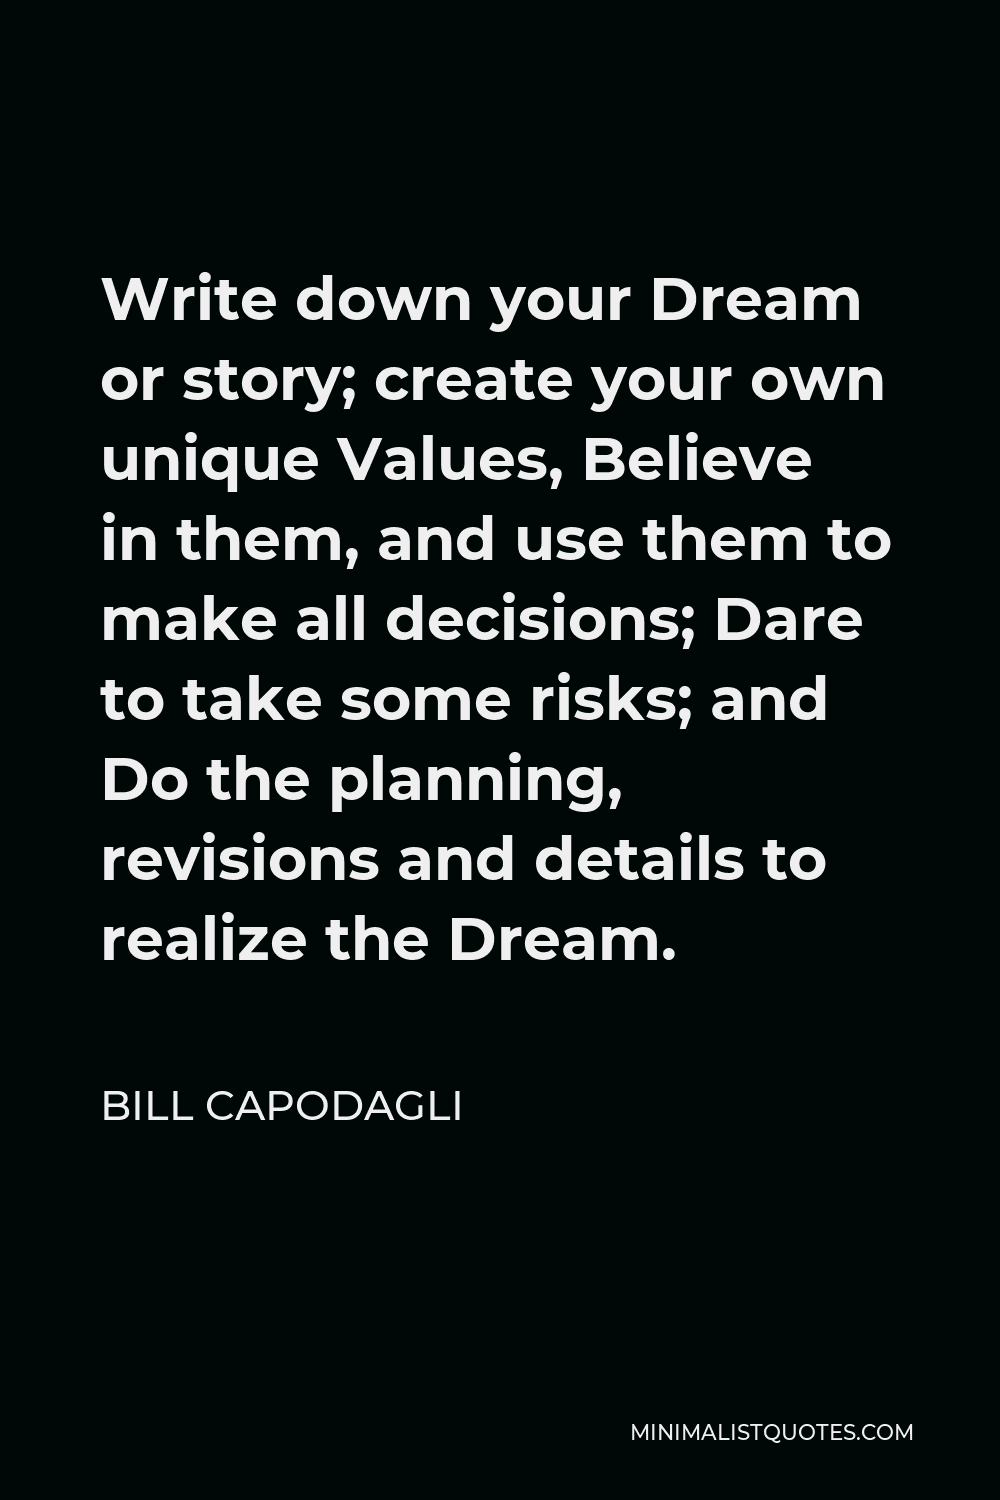 Bill Capodagli Quote - Write down your Dream or story; create your own unique Values, Believe in them, and use them to make all decisions; Dare to take some risks; and Do the planning, revisions and details to realize the Dream.